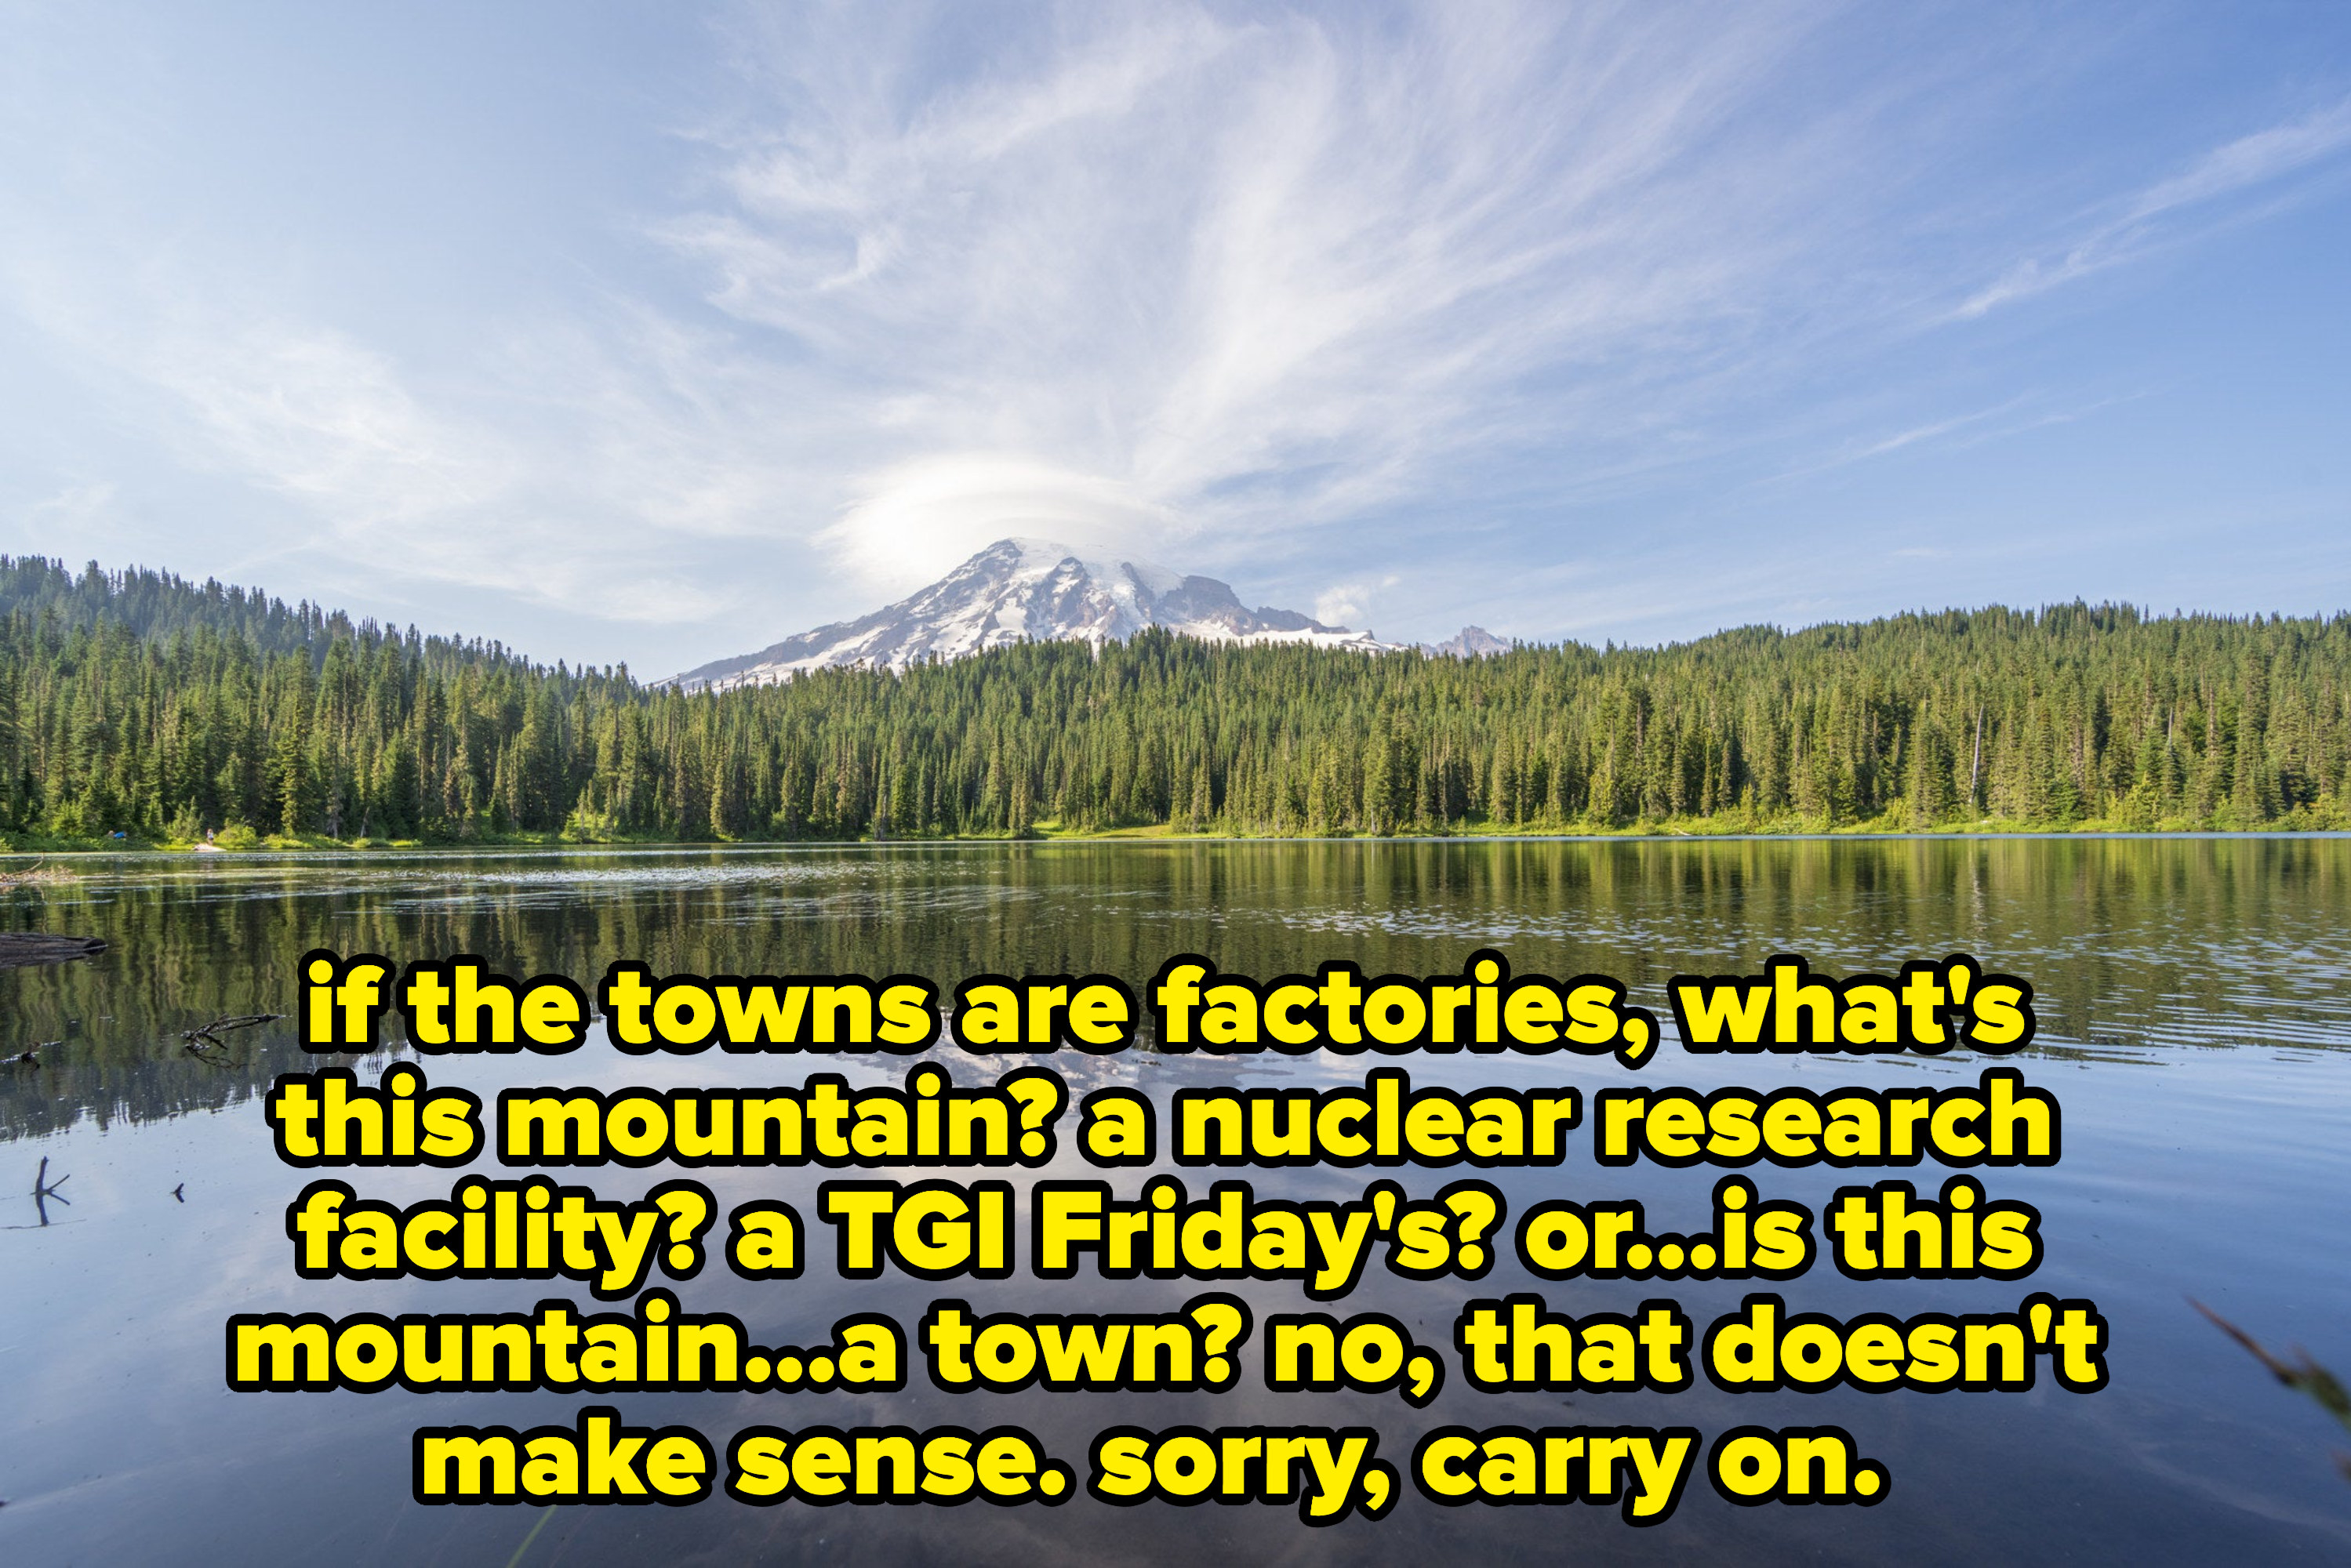 if the towns are factories, what&#x27;s this mountain? a nuclear research facility? a TGI Friday&#x27;s? or...is this mountain...a town? no, that doesn&#x27;t make sense. sorry, carry on.